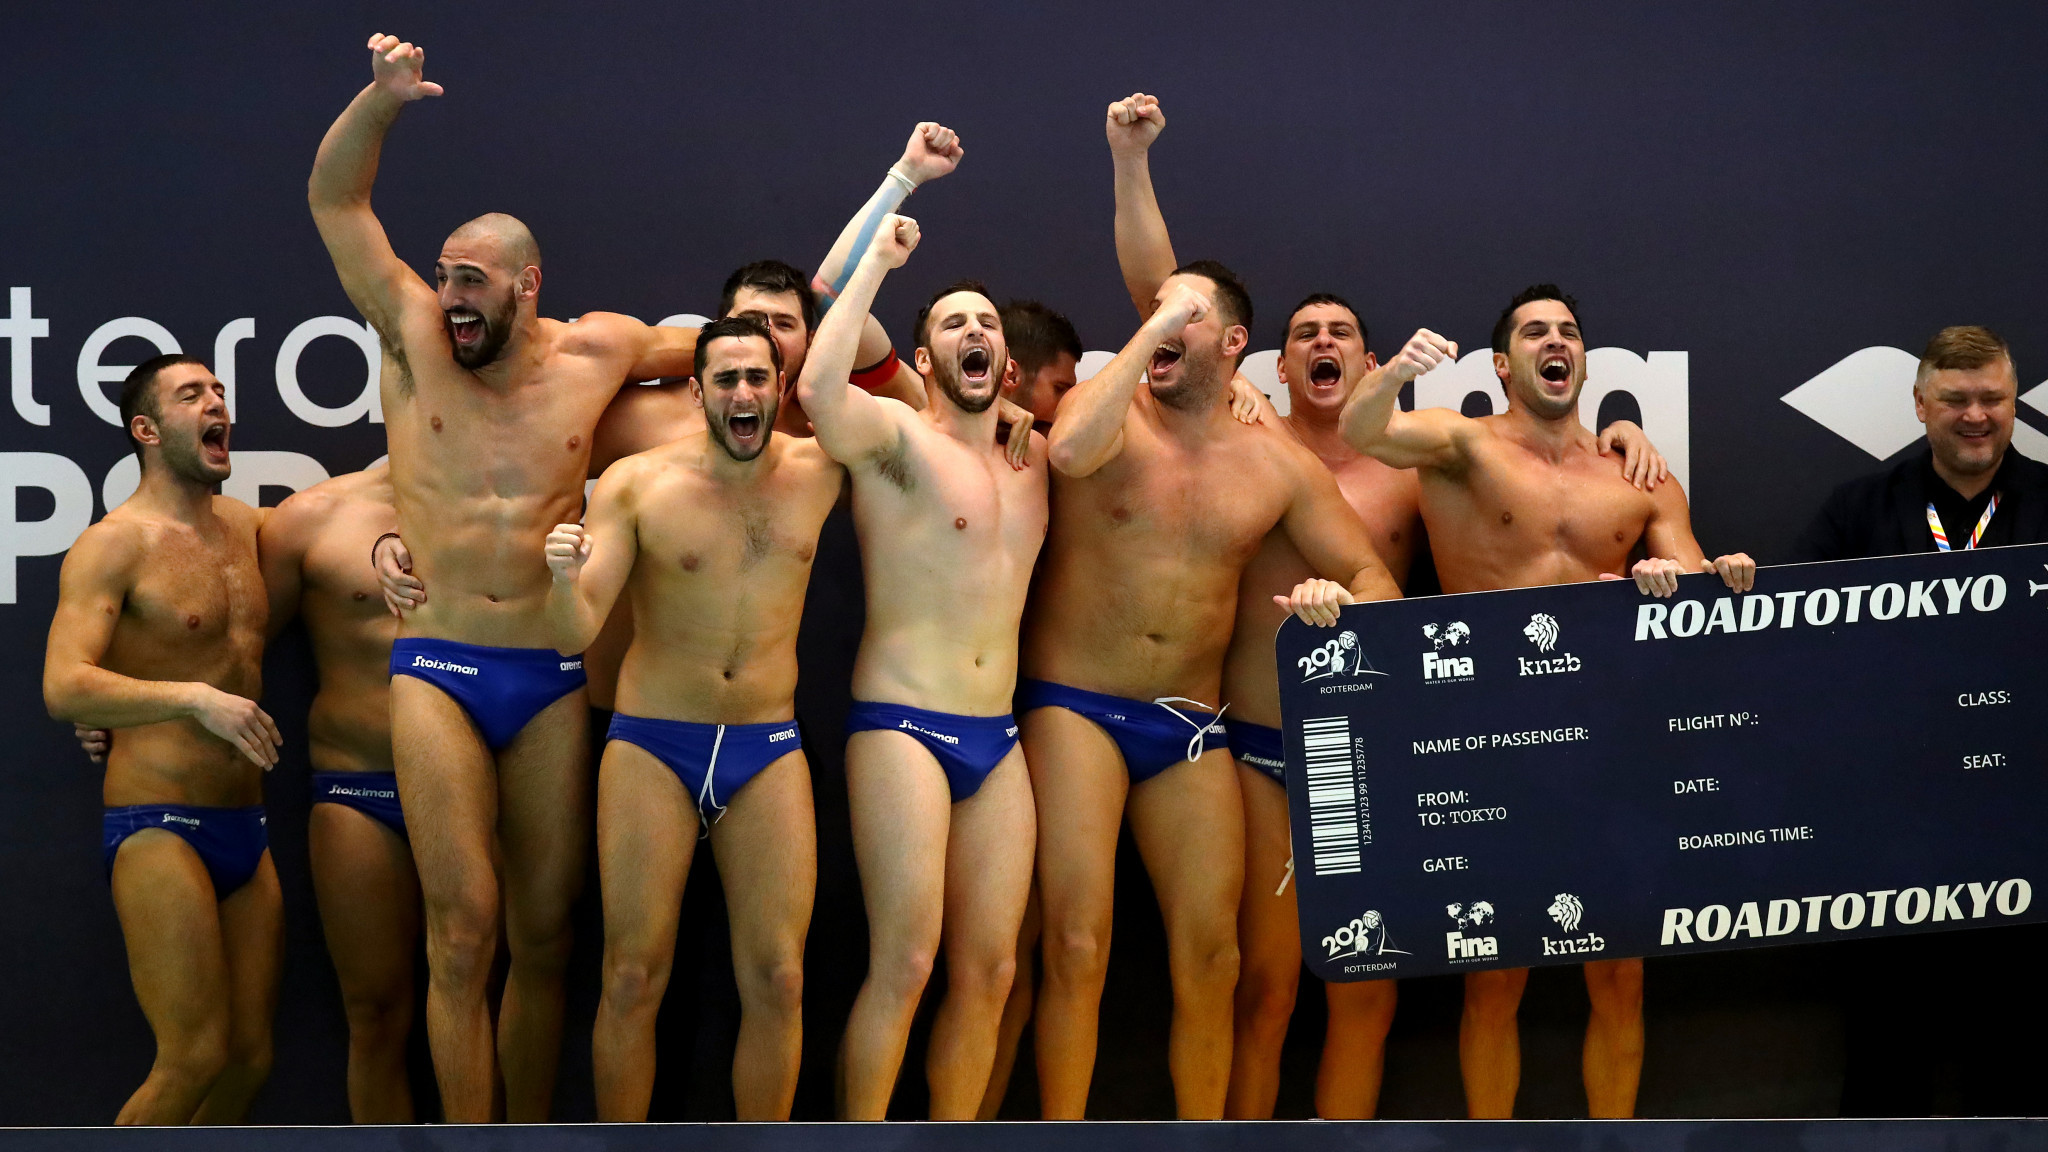 Greece's players celebrate reaching the Tokyo 2020 water polo tournament after defeating Russia ©Getty Images